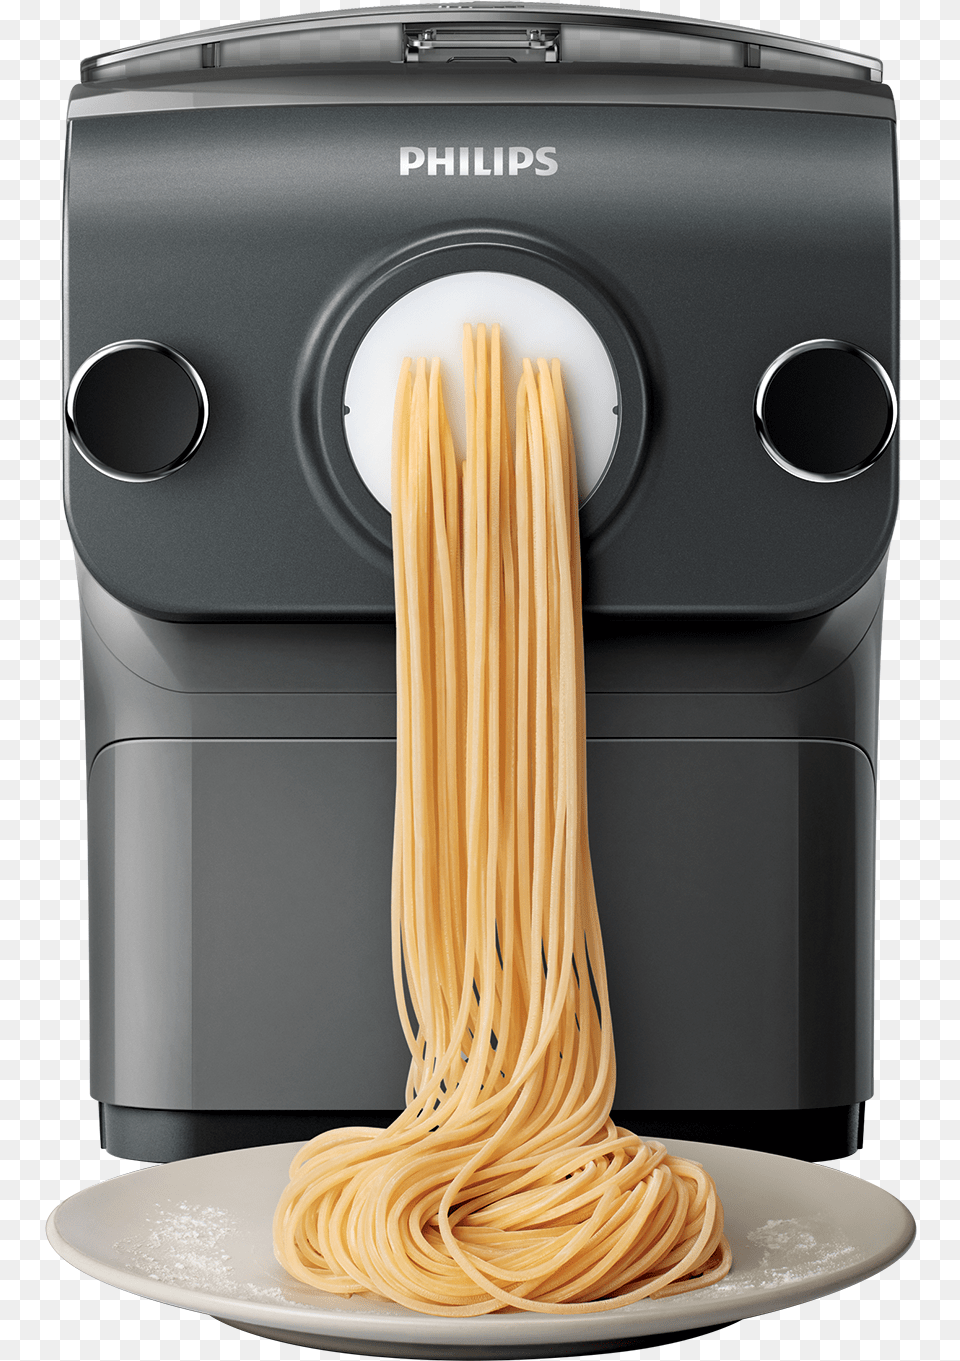 Spaghetti, Food, Noodle, Pasta, Appliance Free Transparent Png